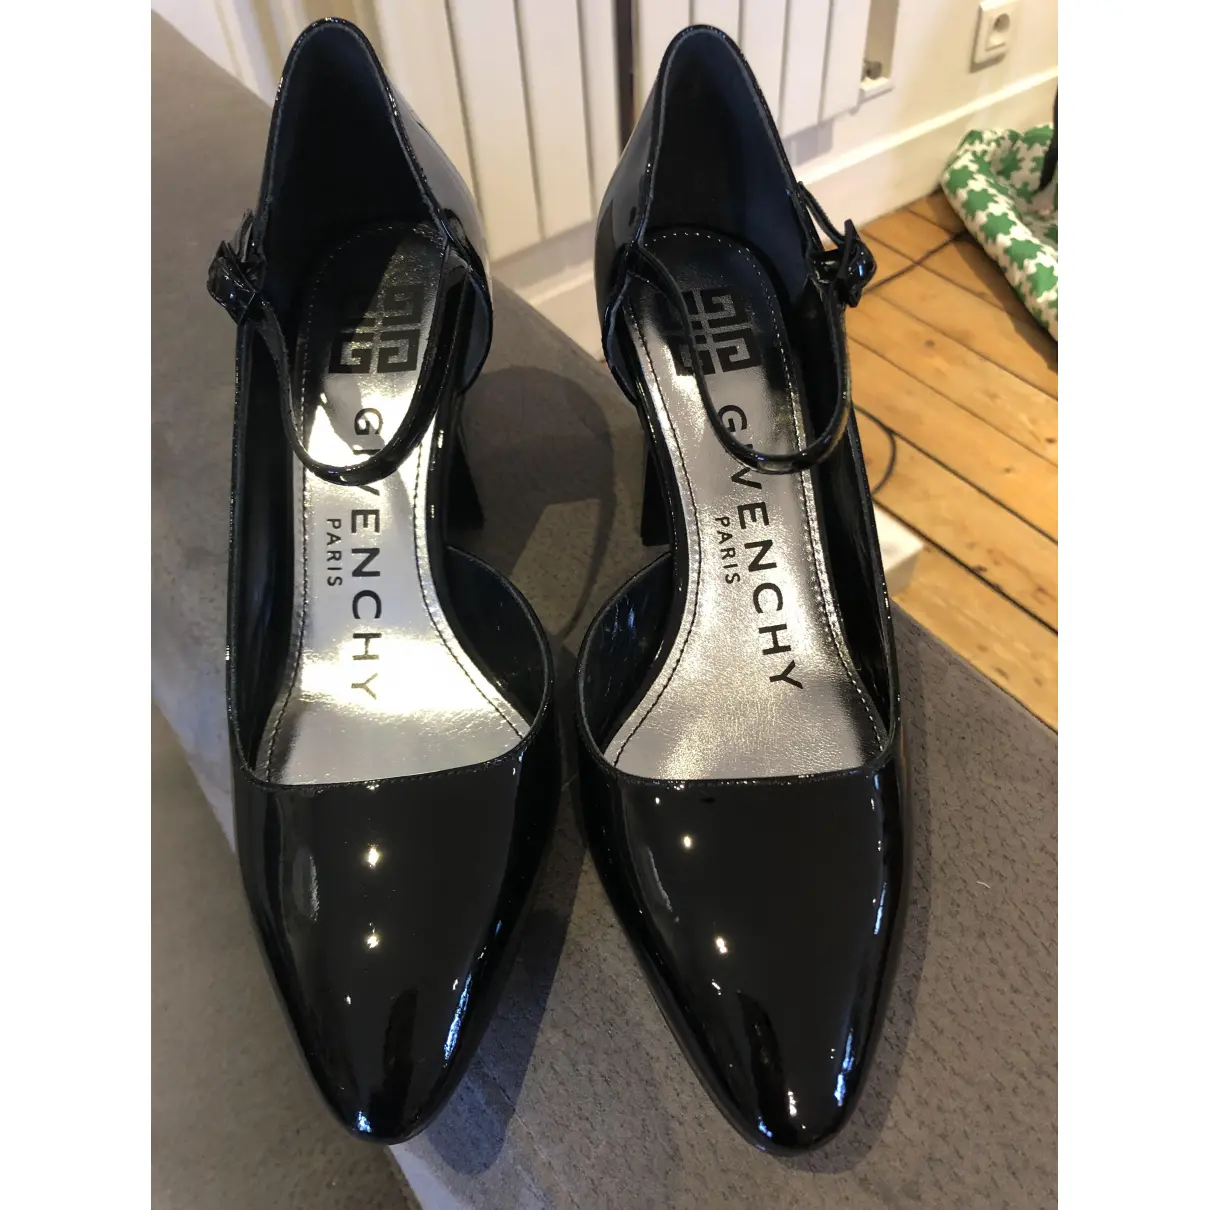 Buy Givenchy Patent leather heels online